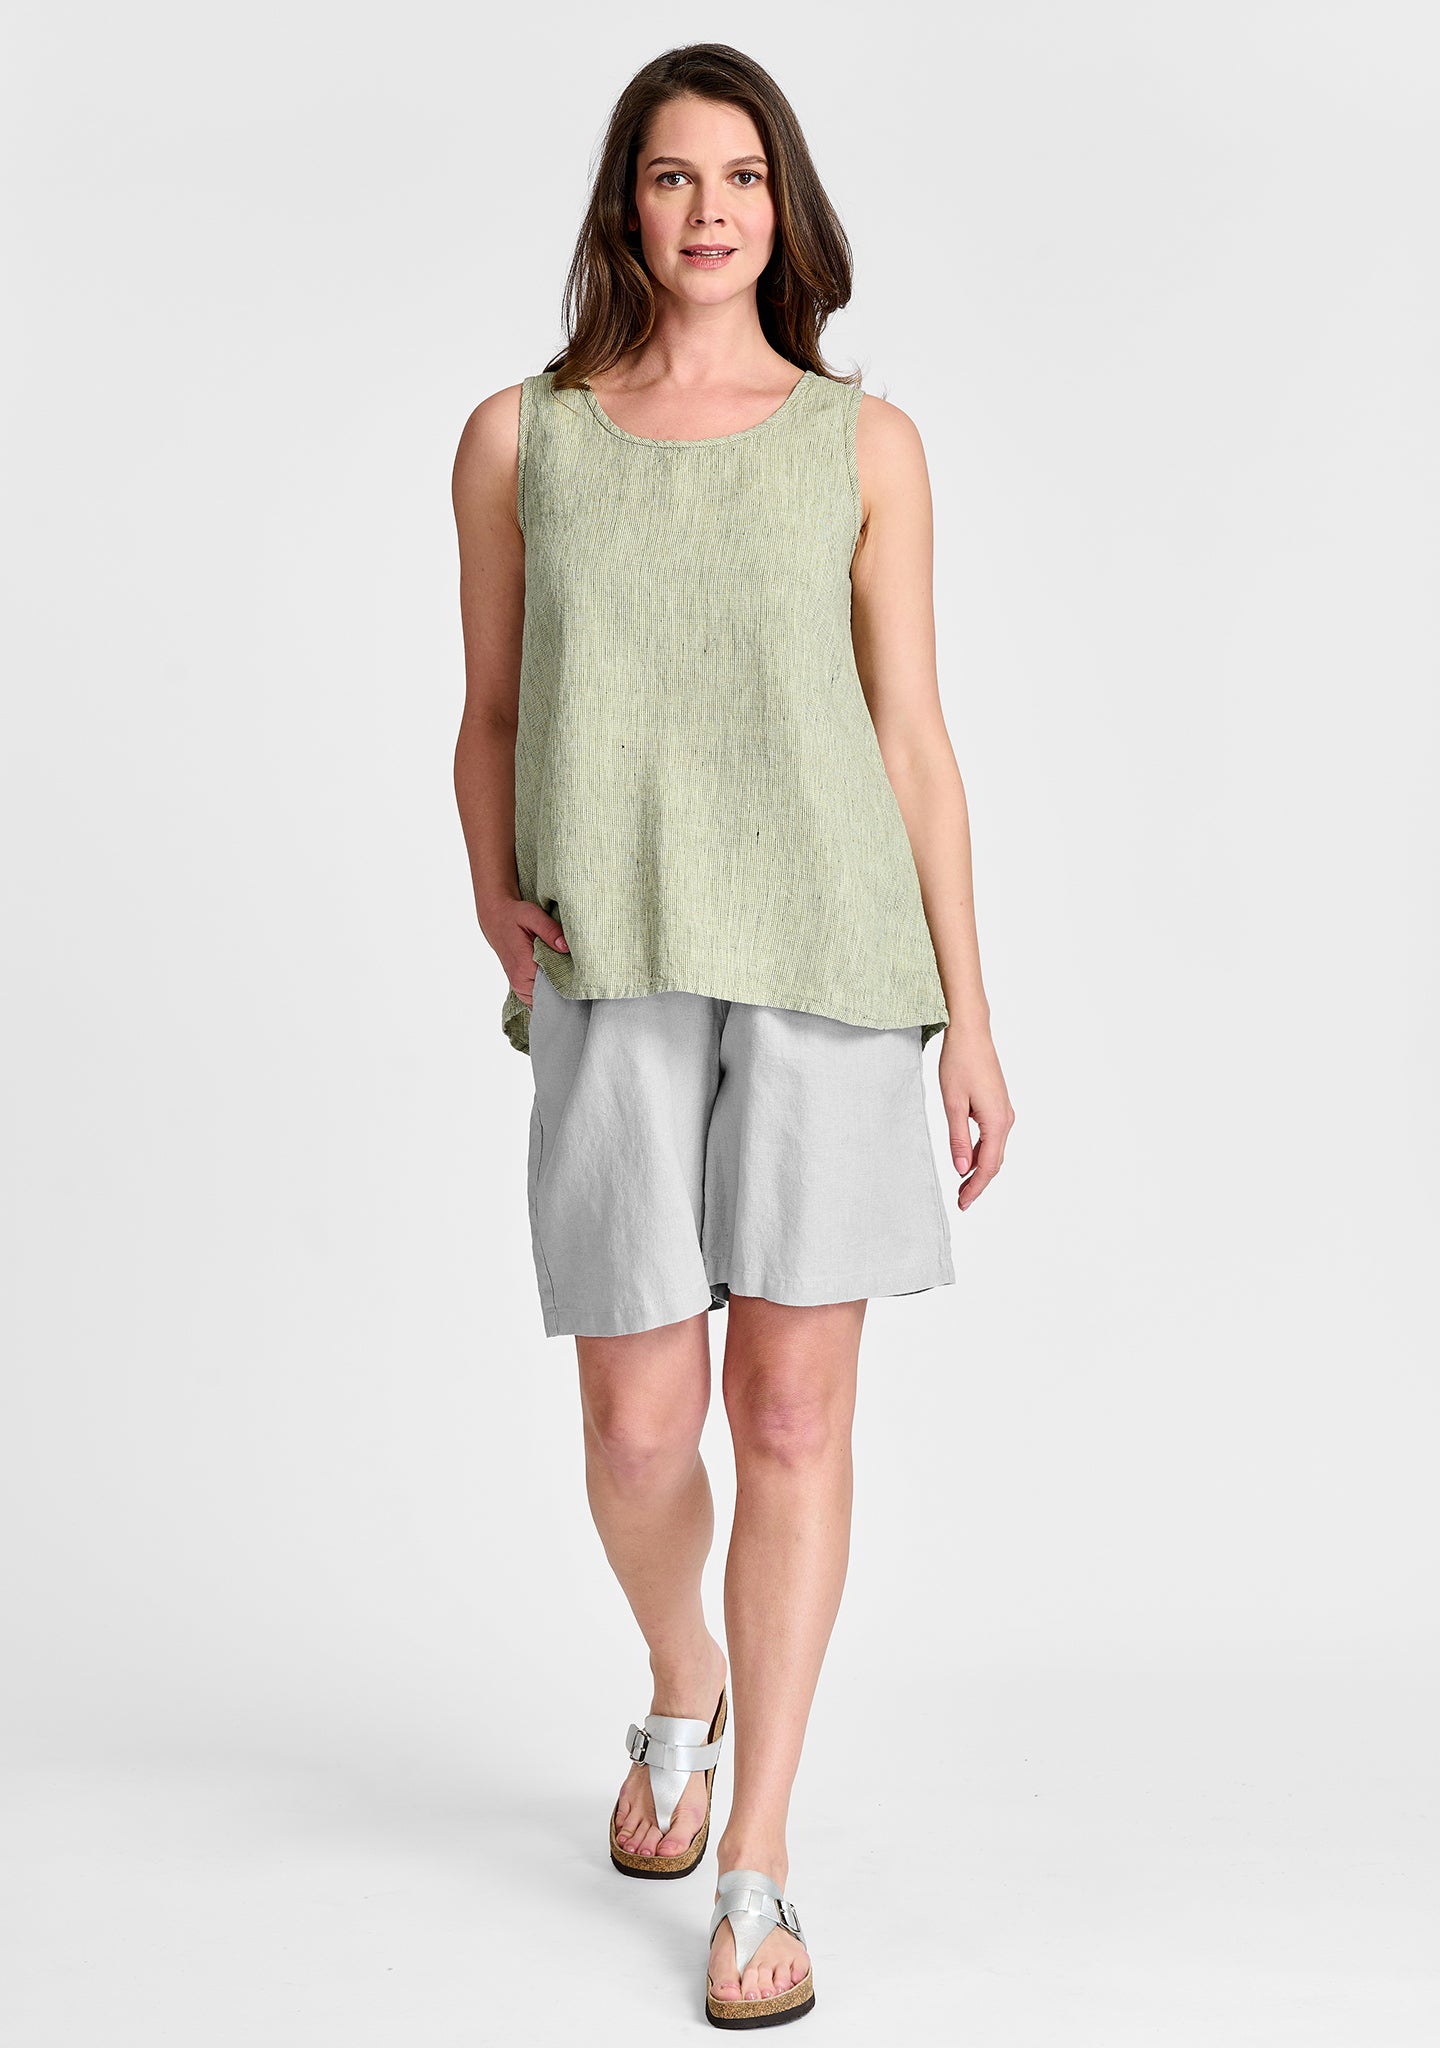 FLAX linen tank in green with linen shorts in grey